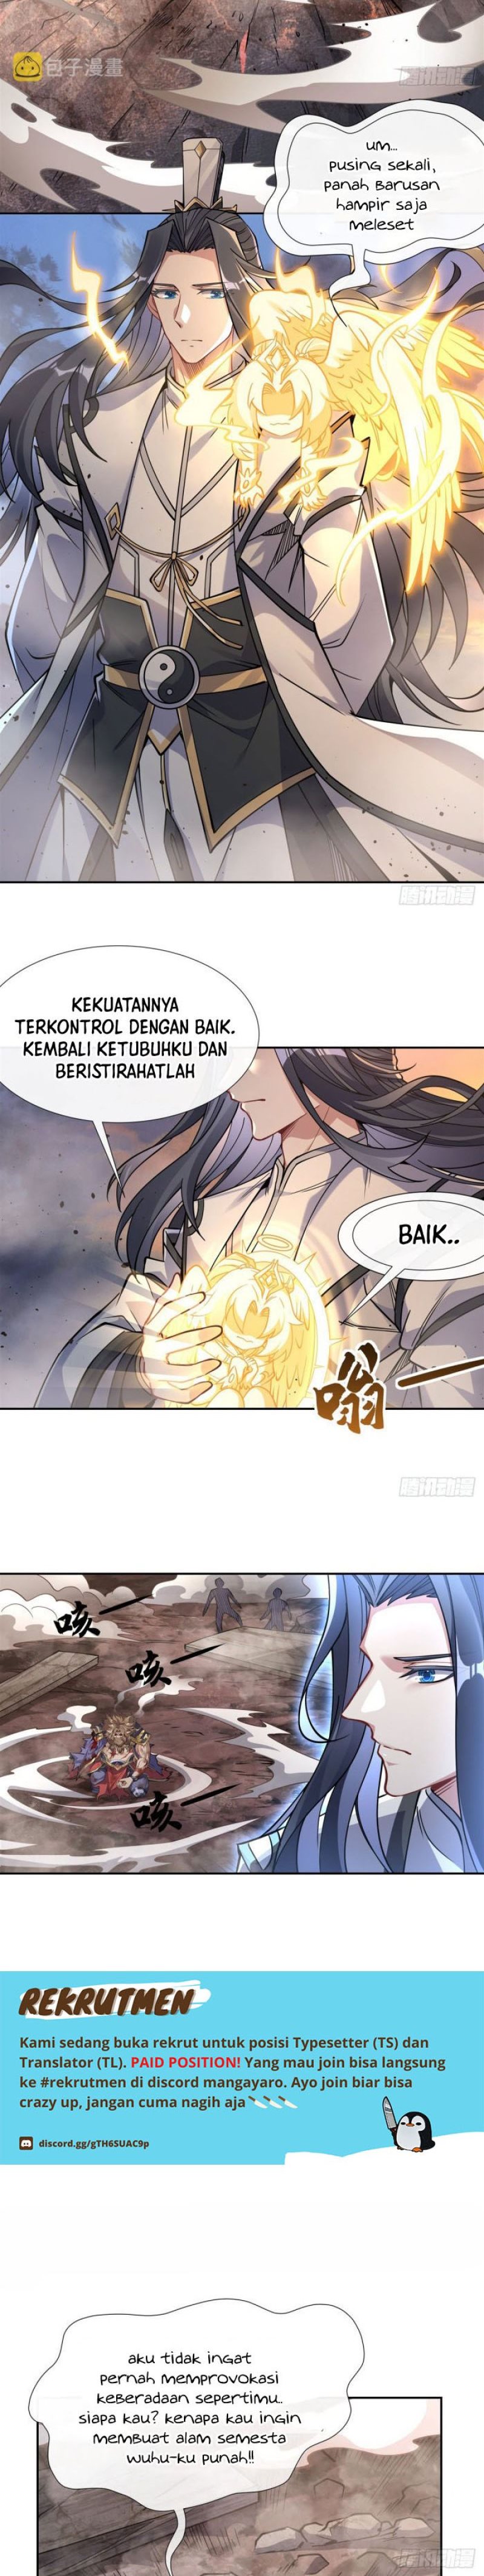 Dilarang COPAS - situs resmi www.mangacanblog.com - Komik my female apprentices are all big shots from the future 135 - chapter 135 136 Indonesia my female apprentices are all big shots from the future 135 - chapter 135 Terbaru 15|Baca Manga Komik Indonesia|Mangacan